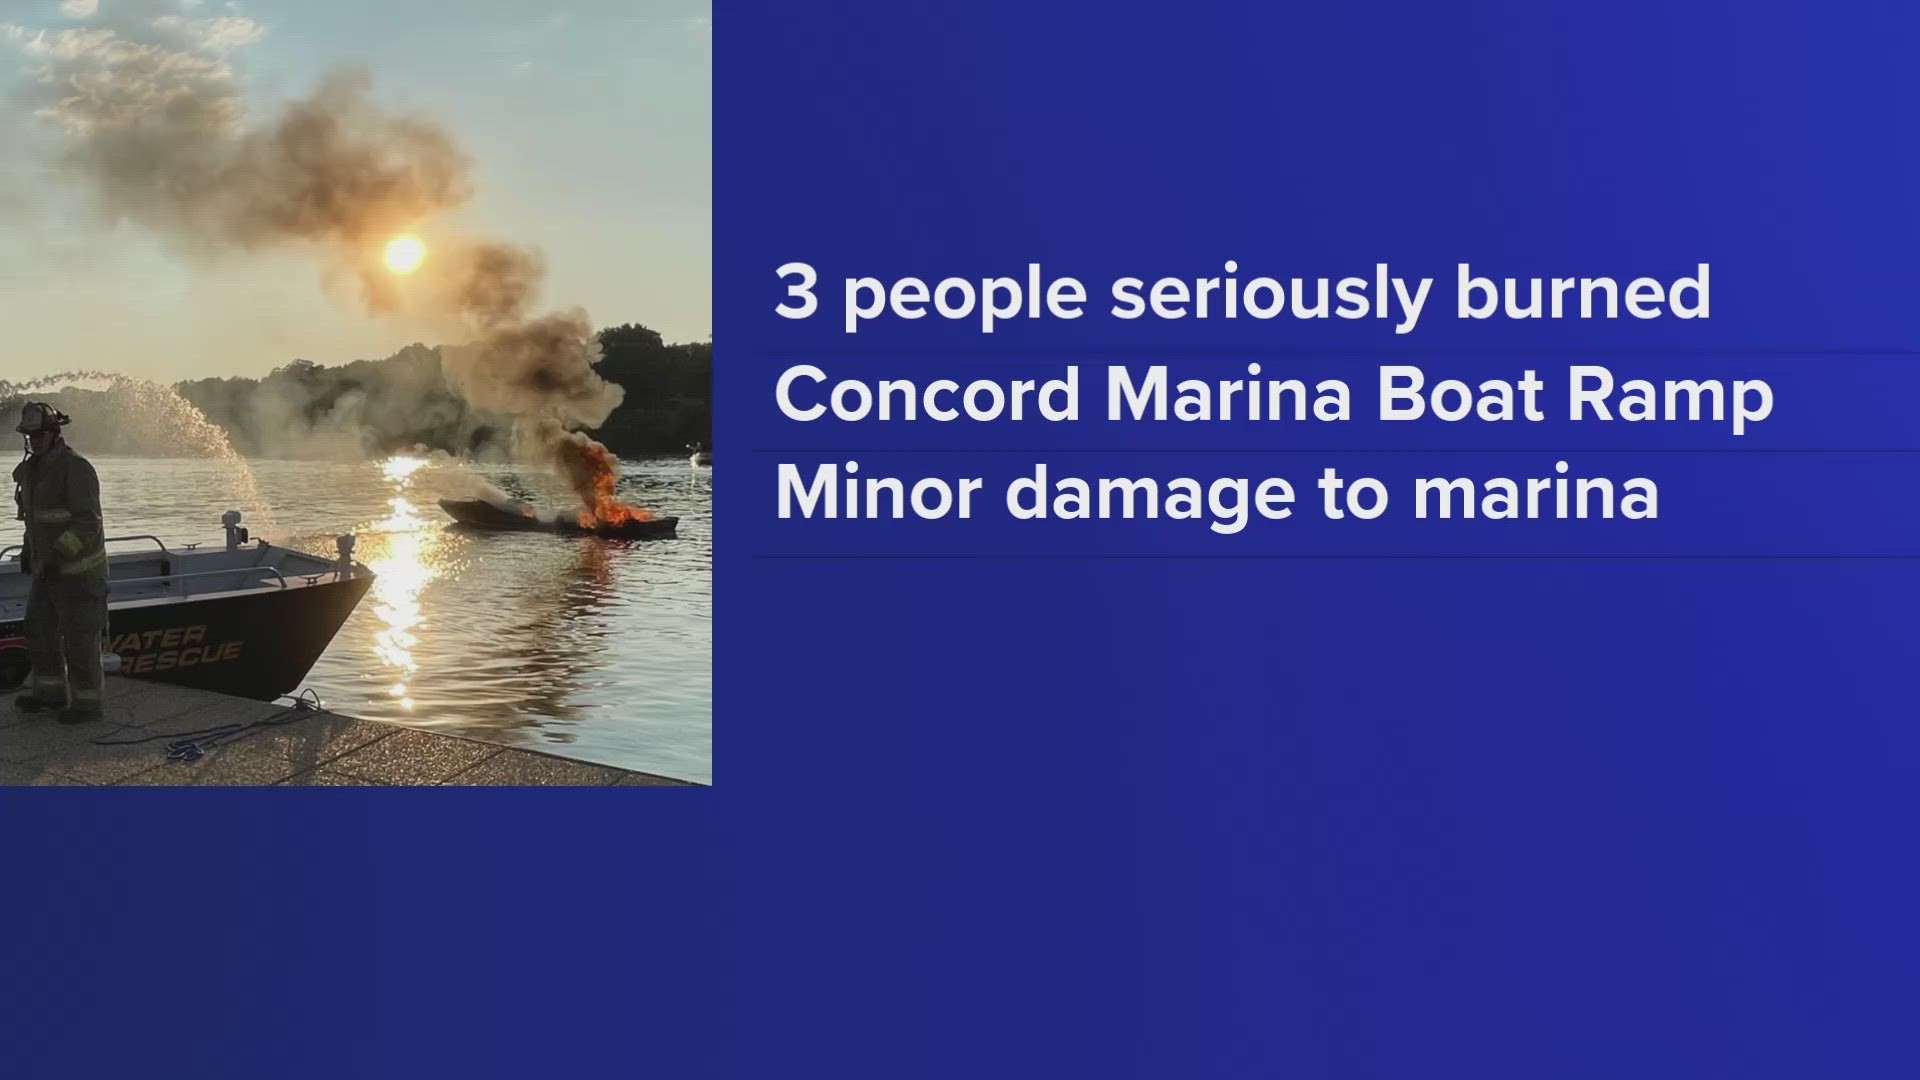 Three people are injured from burns after a boat fire and explosion at the Concord Marina according to Rural Metro.